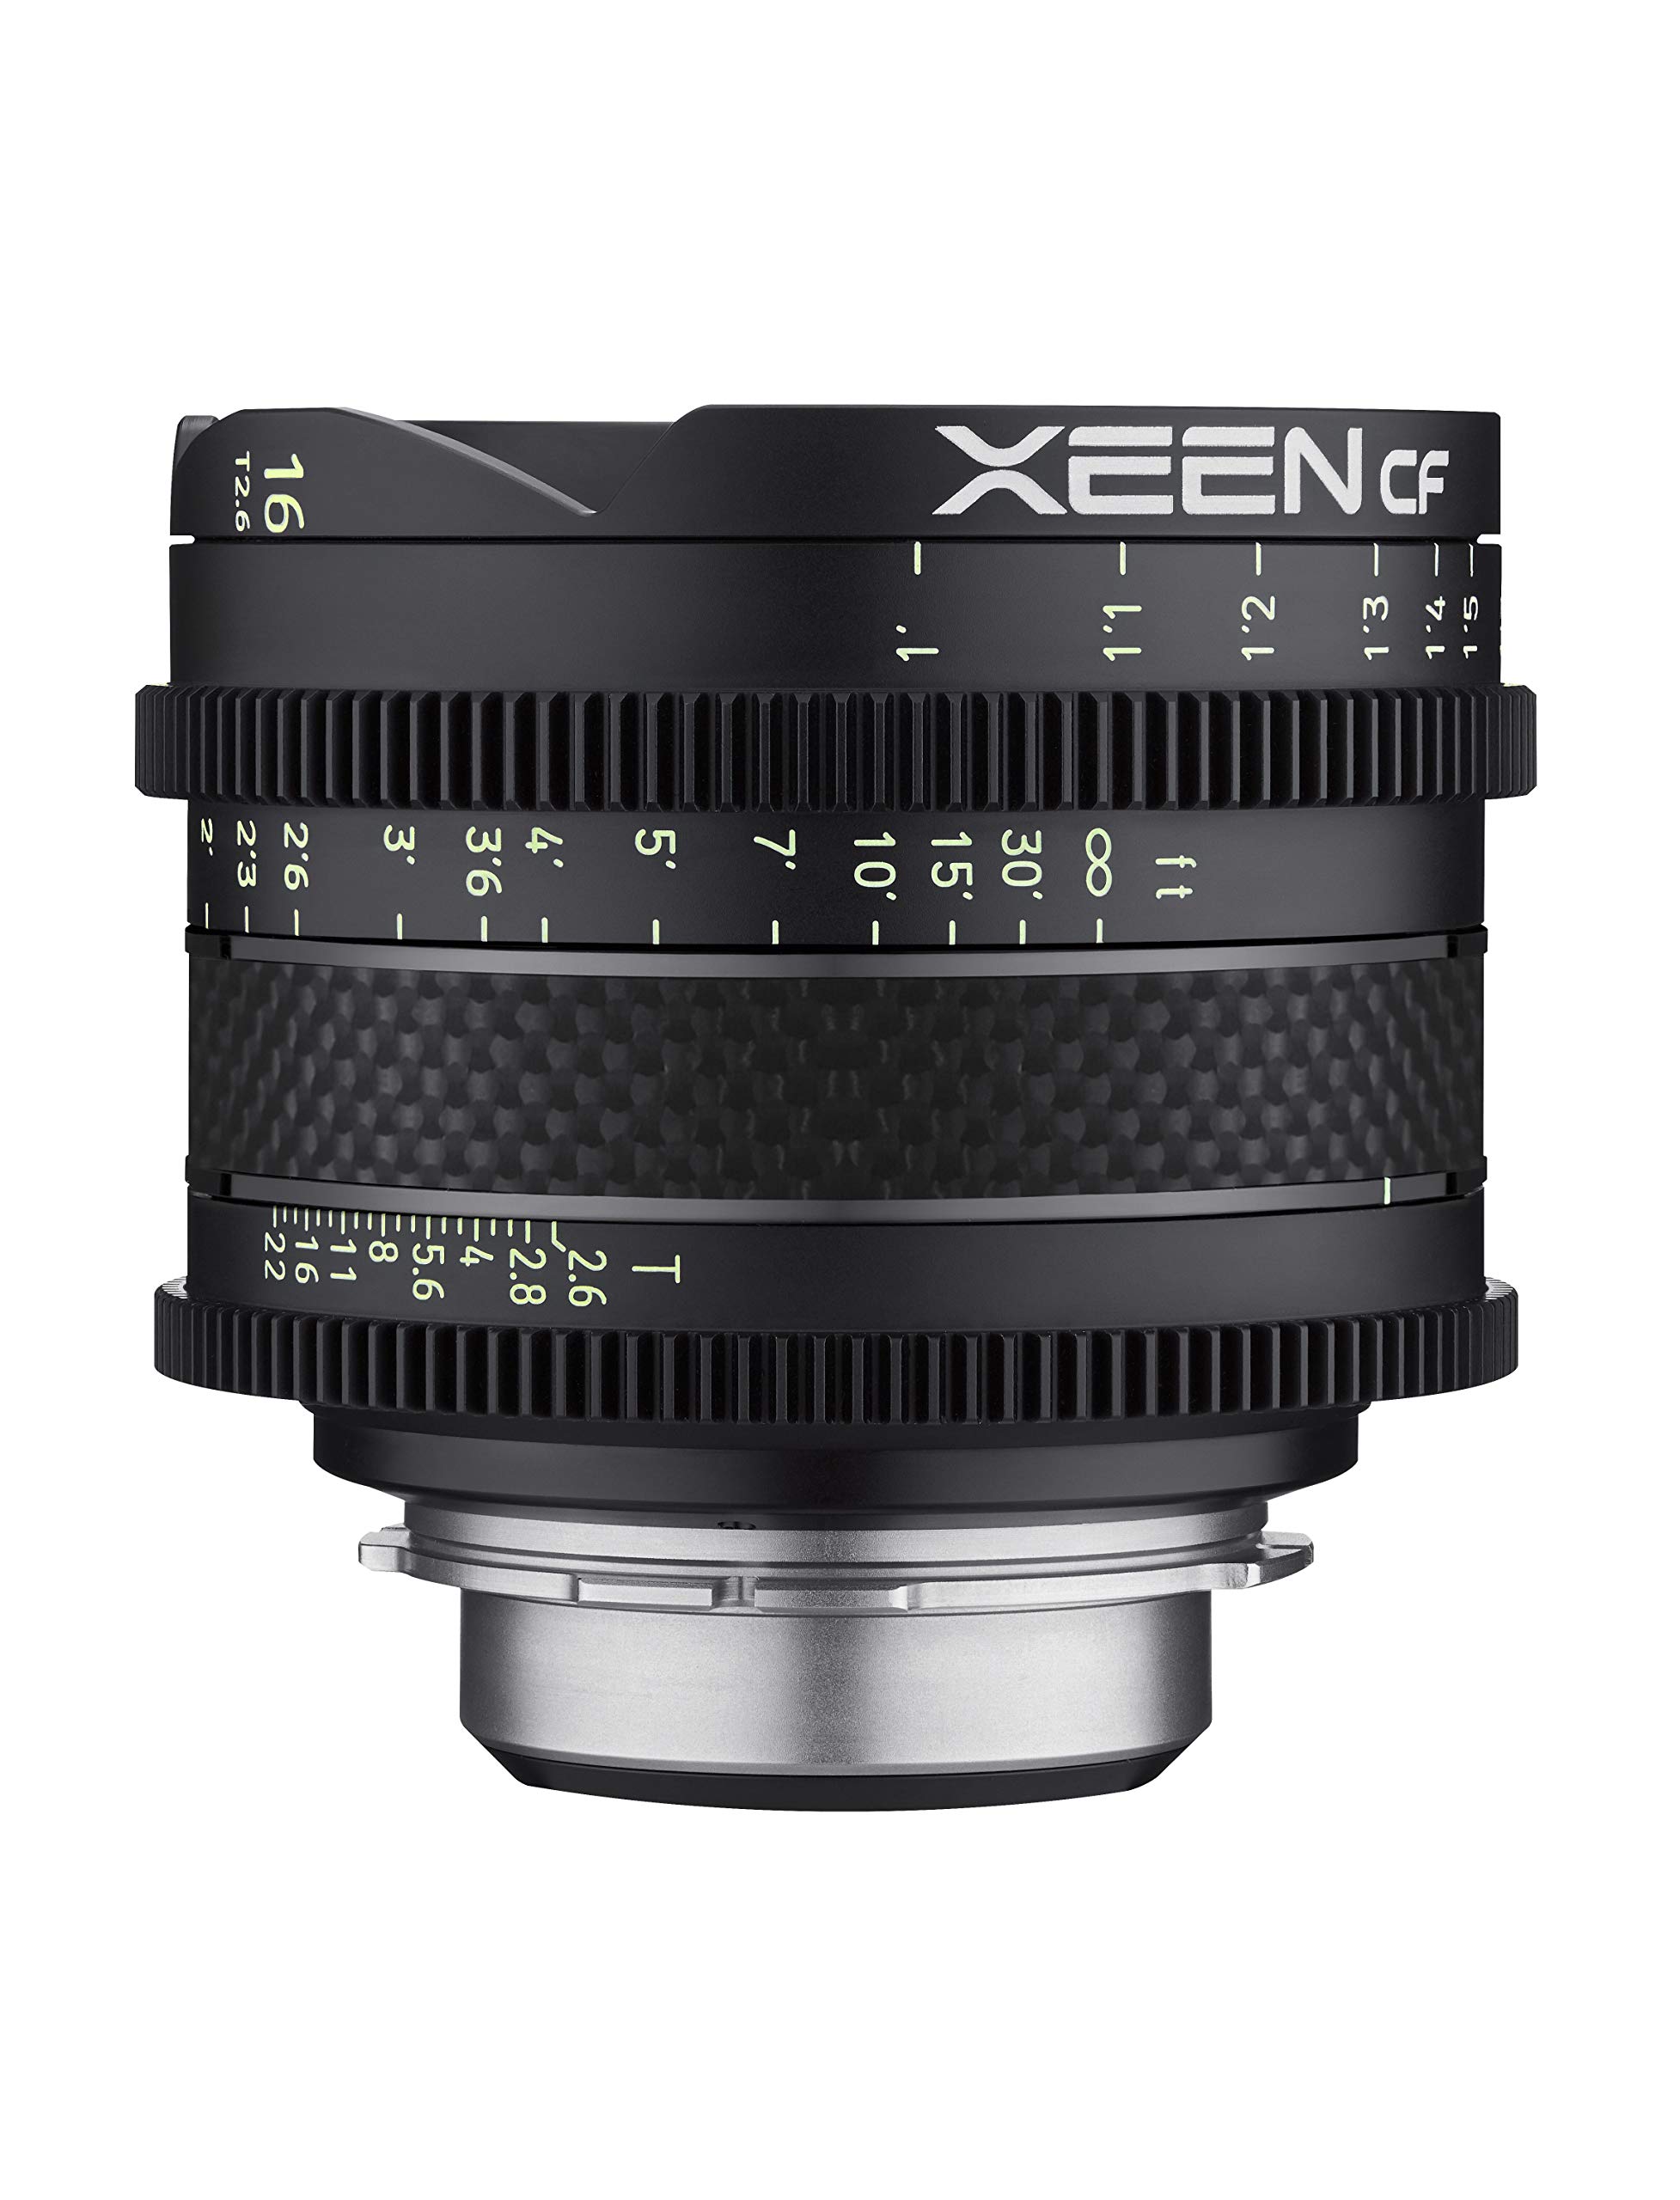 Rokinon Xeen CF 16mm T2.6 Pro Cinema Wide Angle Lens with Carbon Fiber Construction & Luminous Markings for Canon EF Mount, CFX16-C, Black, Mid-Size